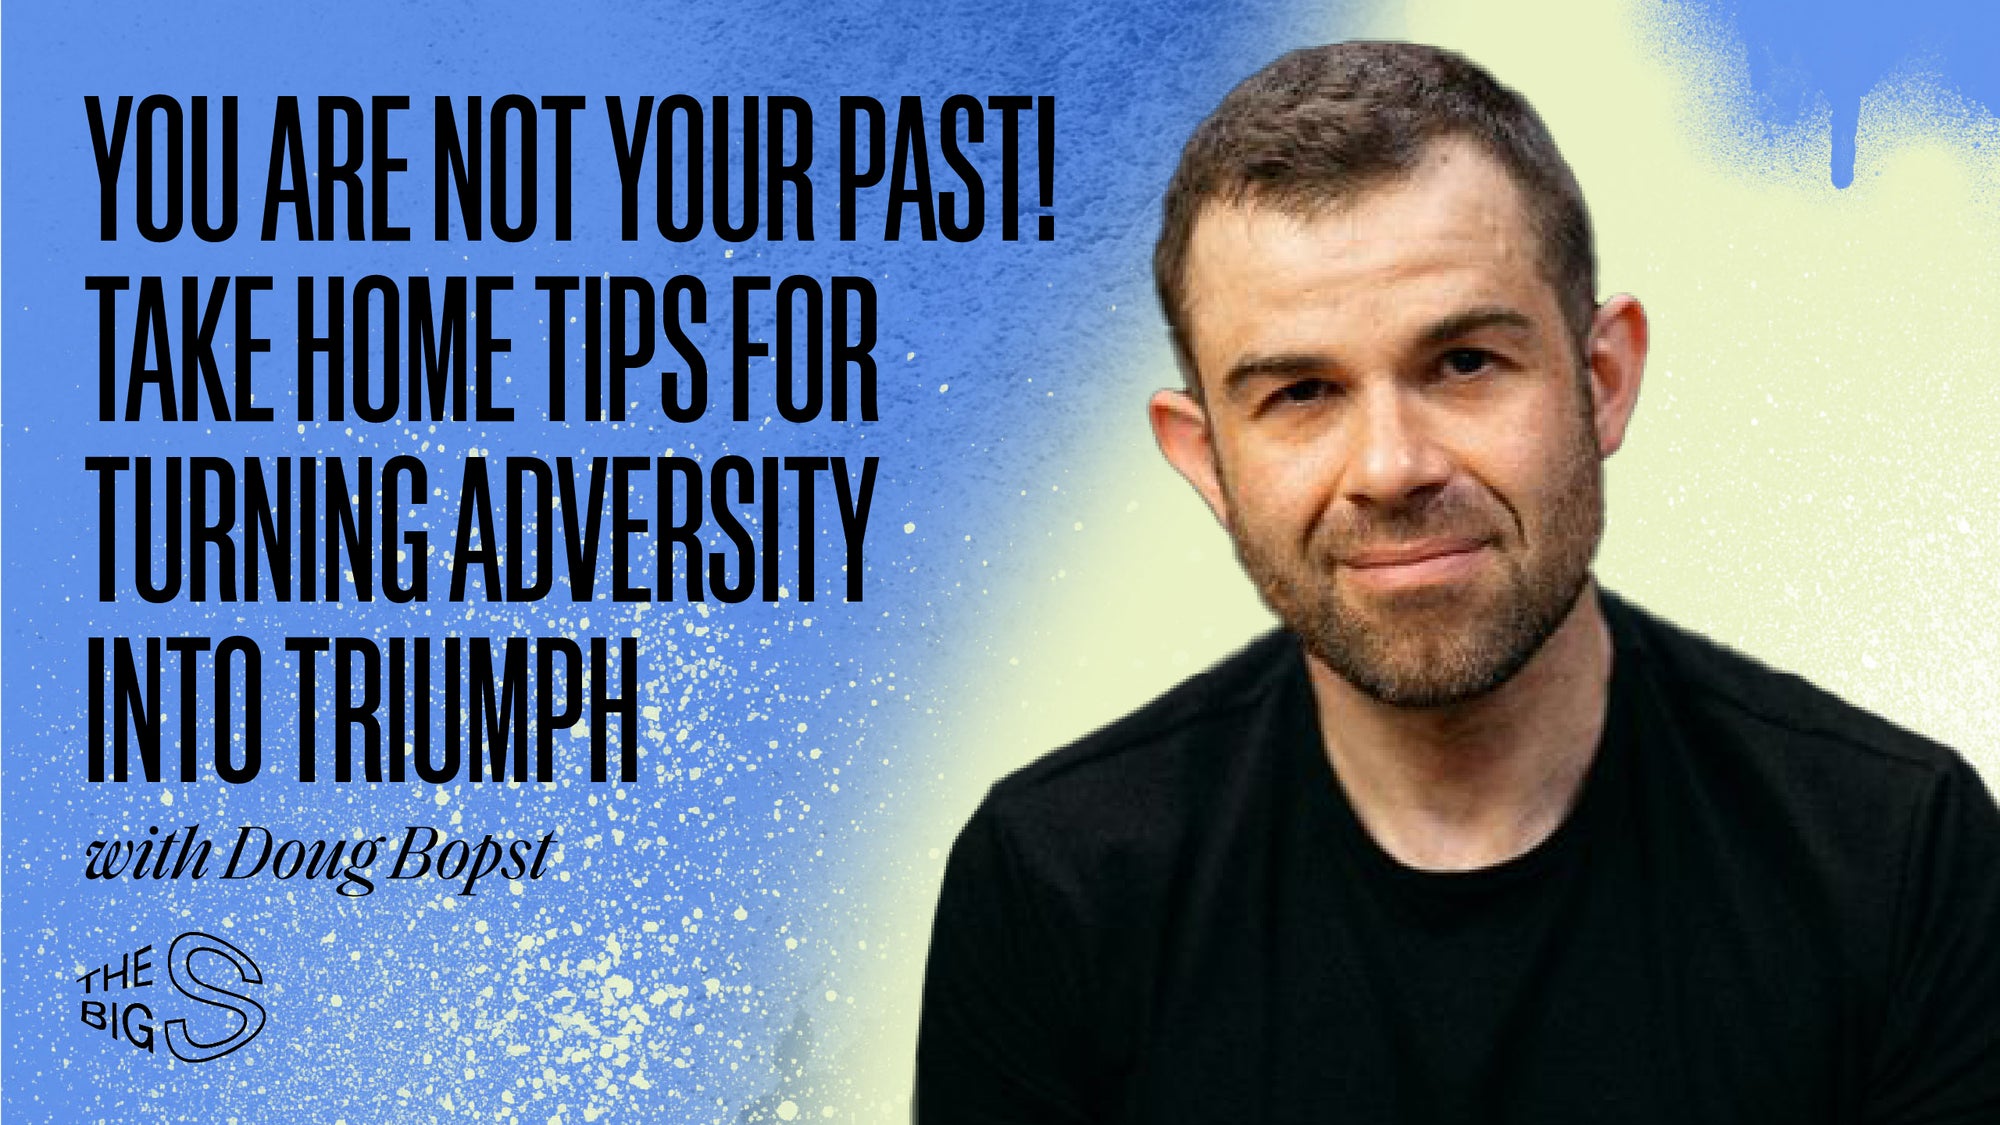 88. YOU ARE NOT YOUR PAST! TAKE HOME TIPS FOR TURNING ADVERSITY INTO TRIUMPH WITH DOUG BOPST